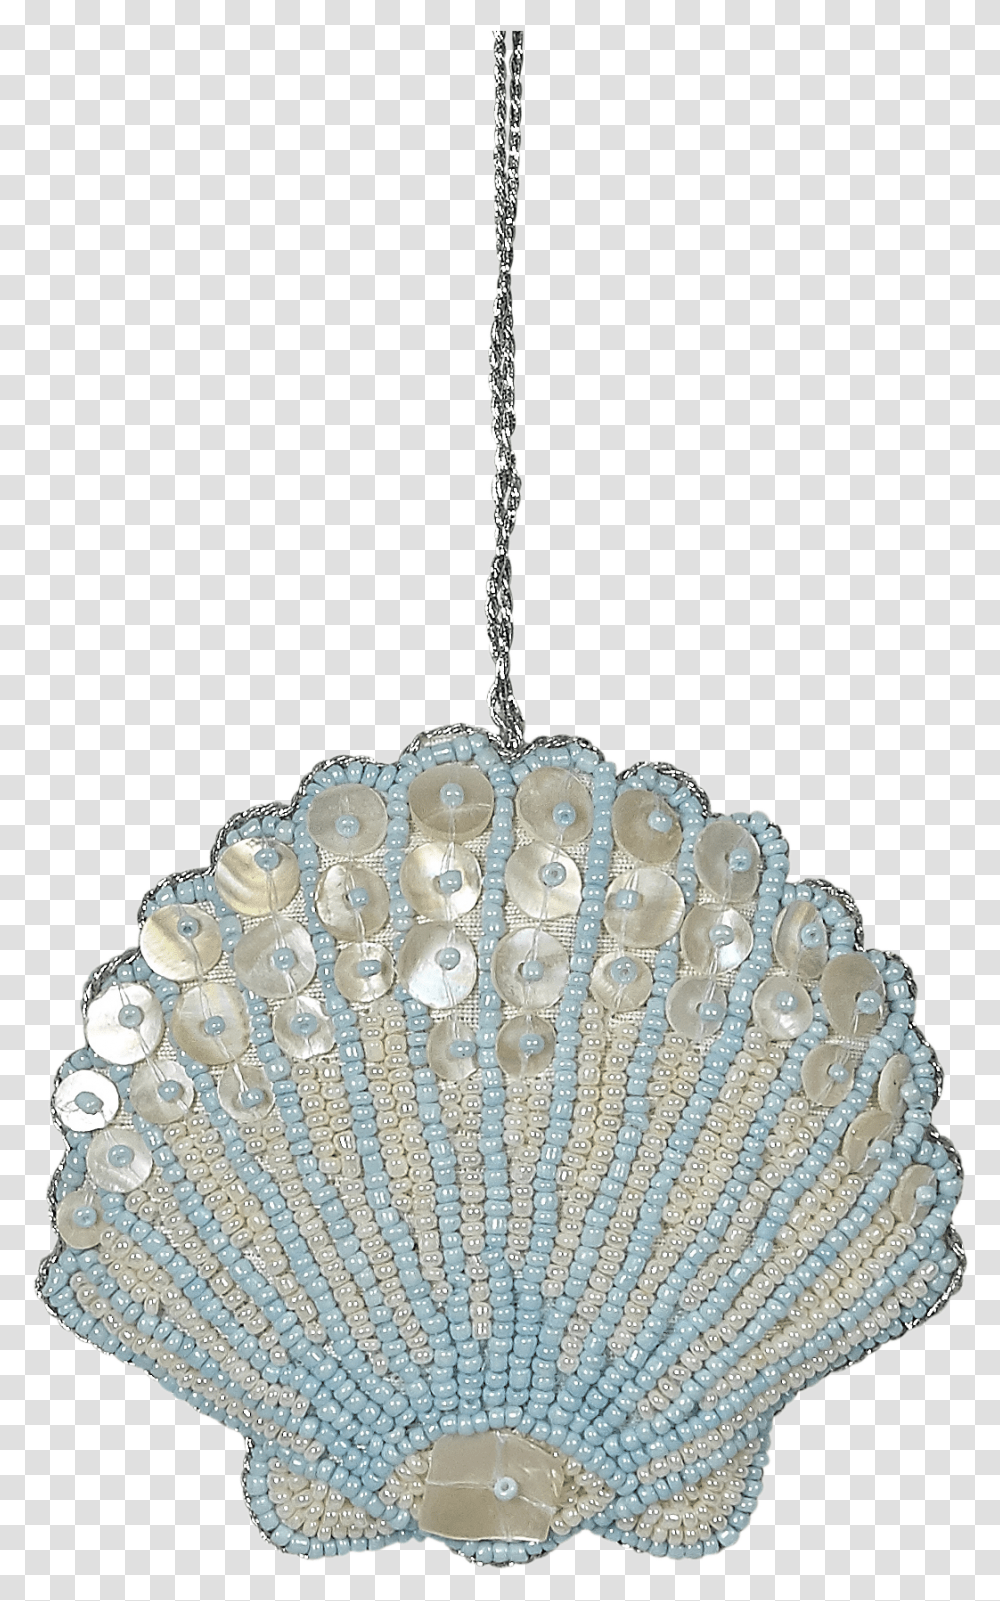 Bead And Mother Of Pearl Ornament Chandelier, Lamp, Crystal Transparent Png